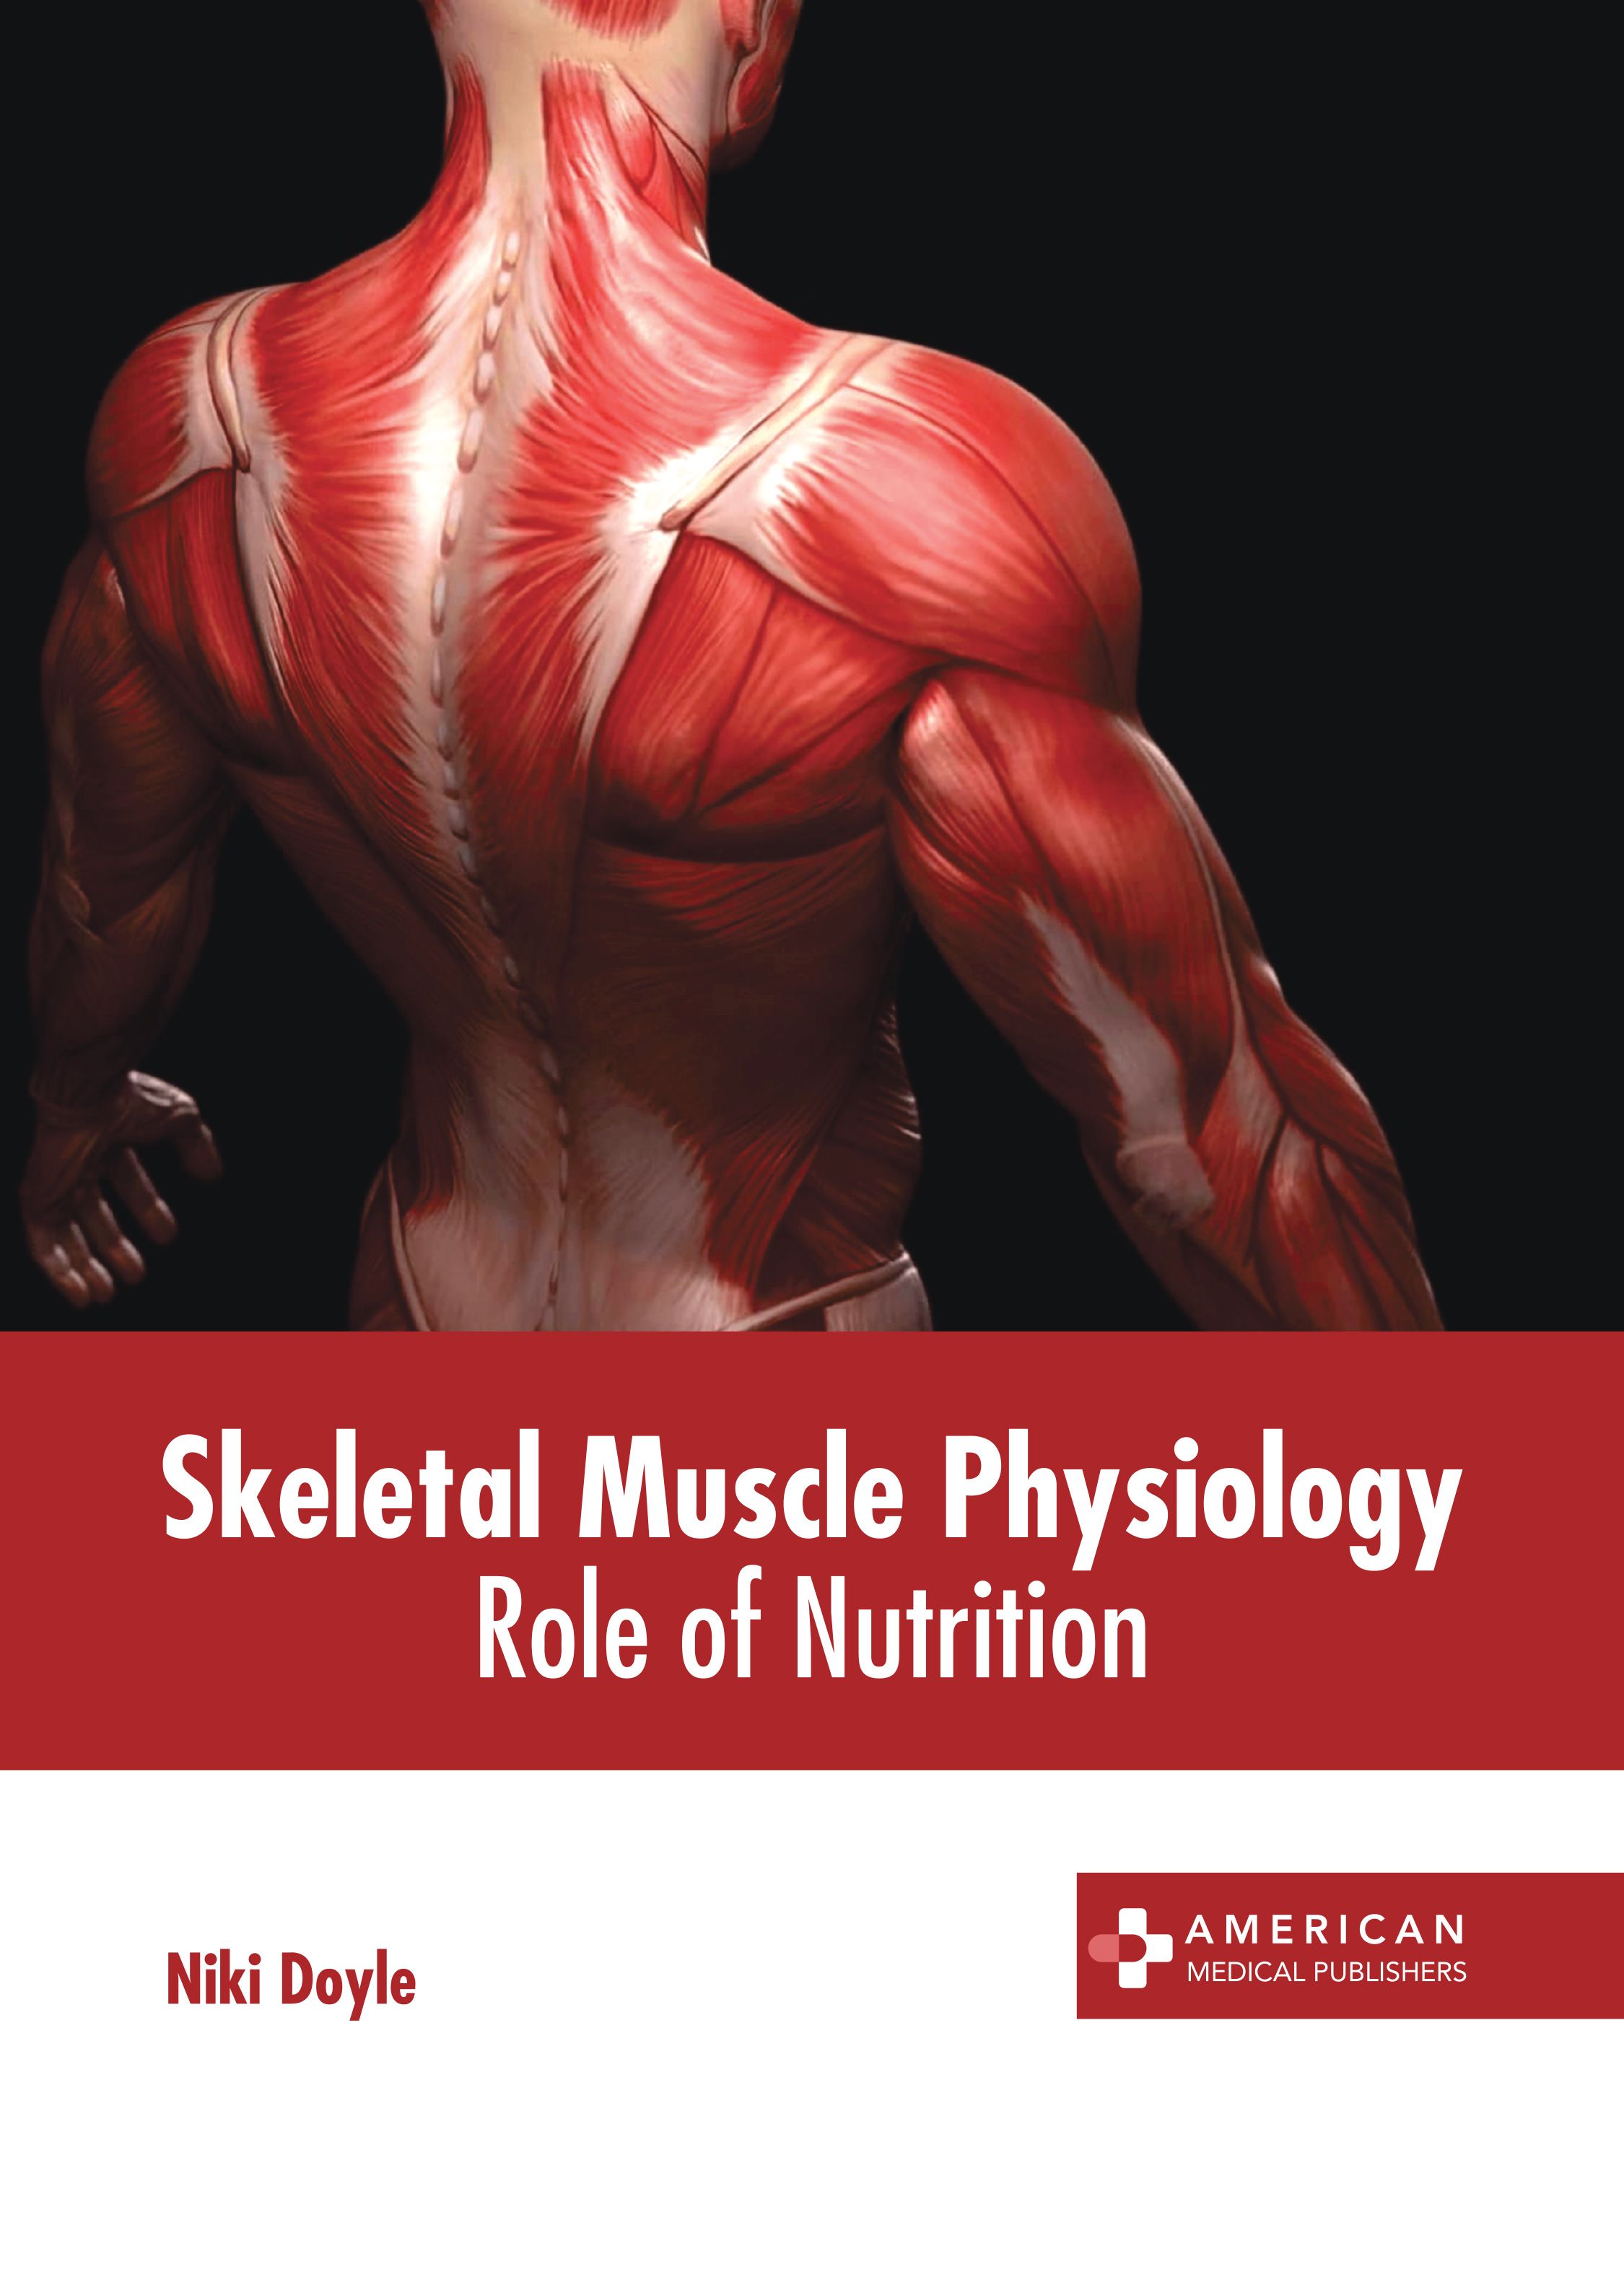 SKELETAL MUSCLE PHYSIOLOGY: ROLE OF NUTRITION